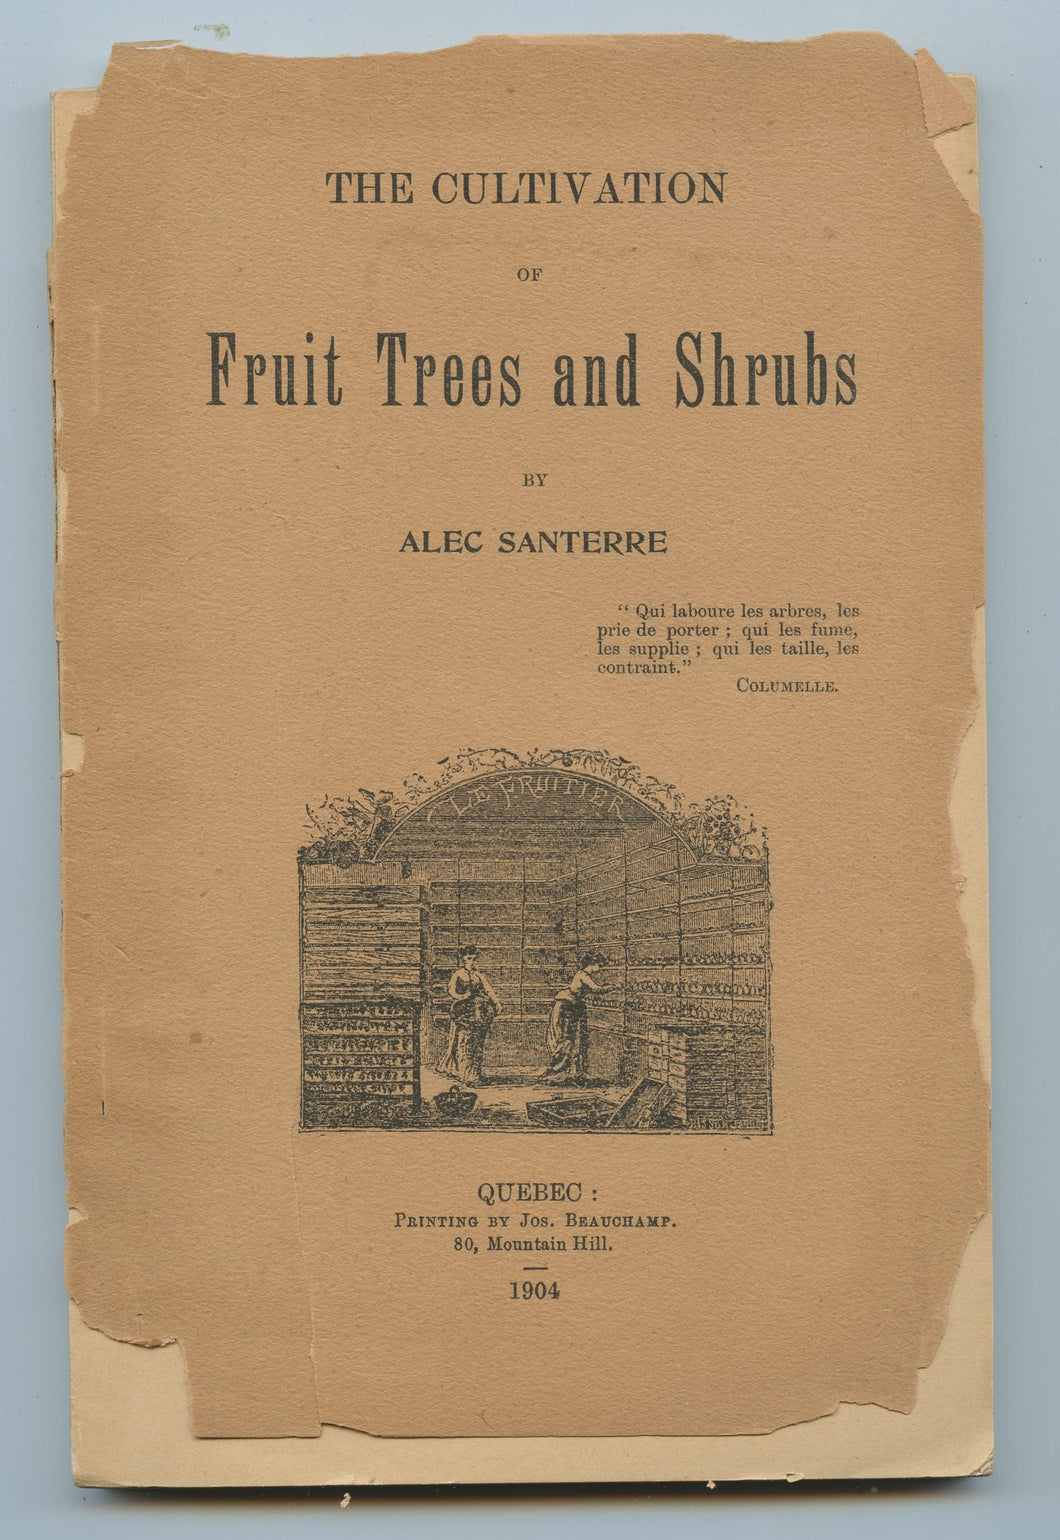 The Cultivation of Fruit Trees and Shrubs